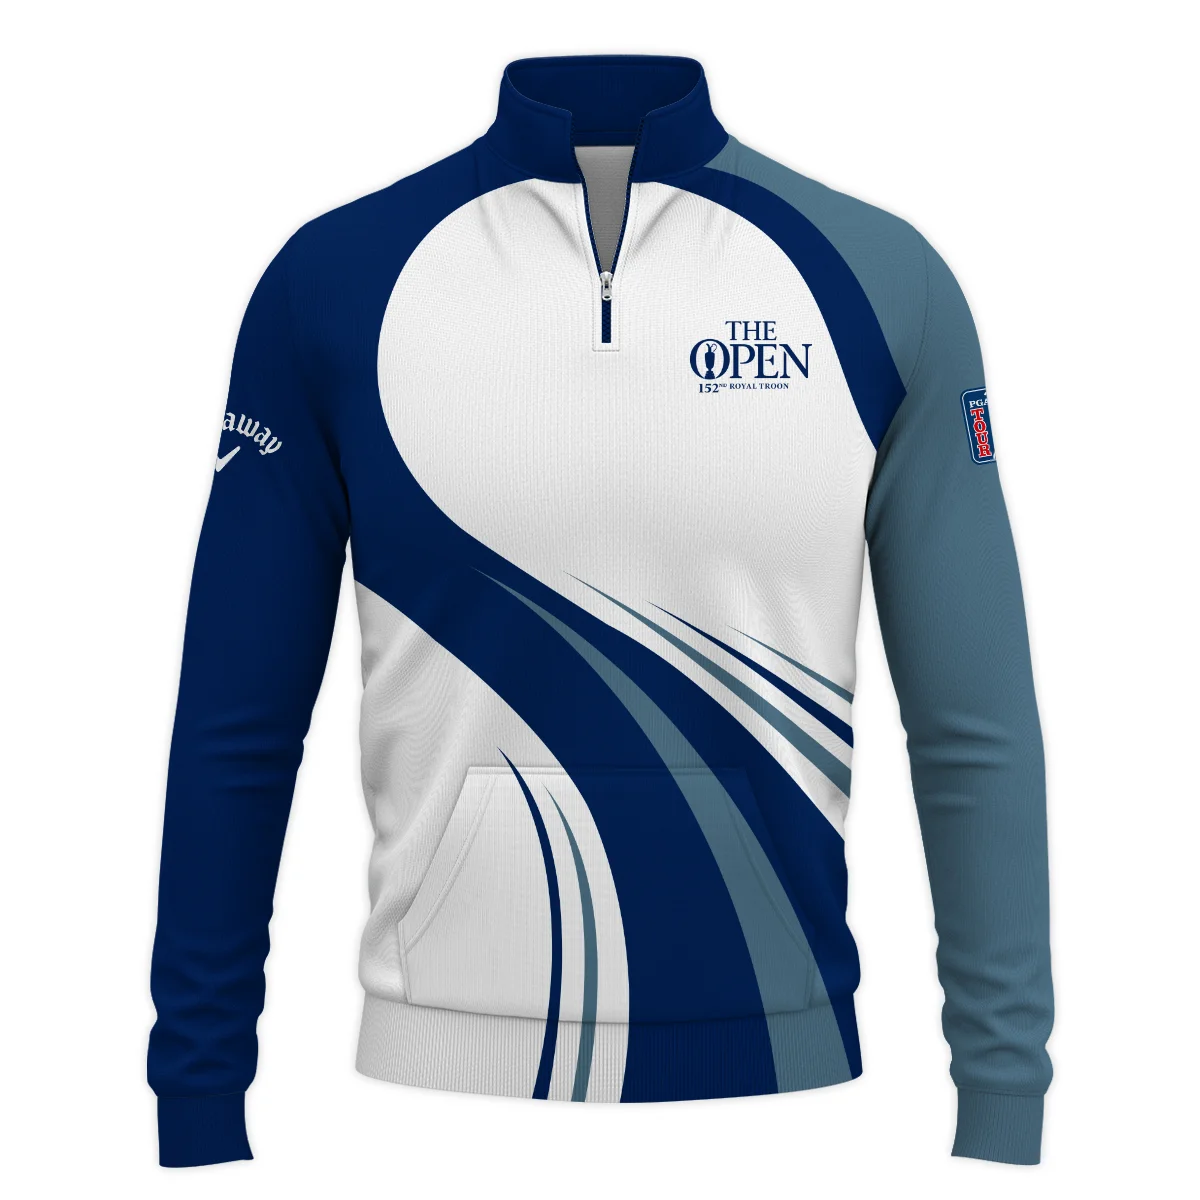 152nd Open Championship Callaway White Mostly Desaturated Dark Blue Zipper Hoodie Shirt All Over Prints HOTOP270624A02CLWZHD